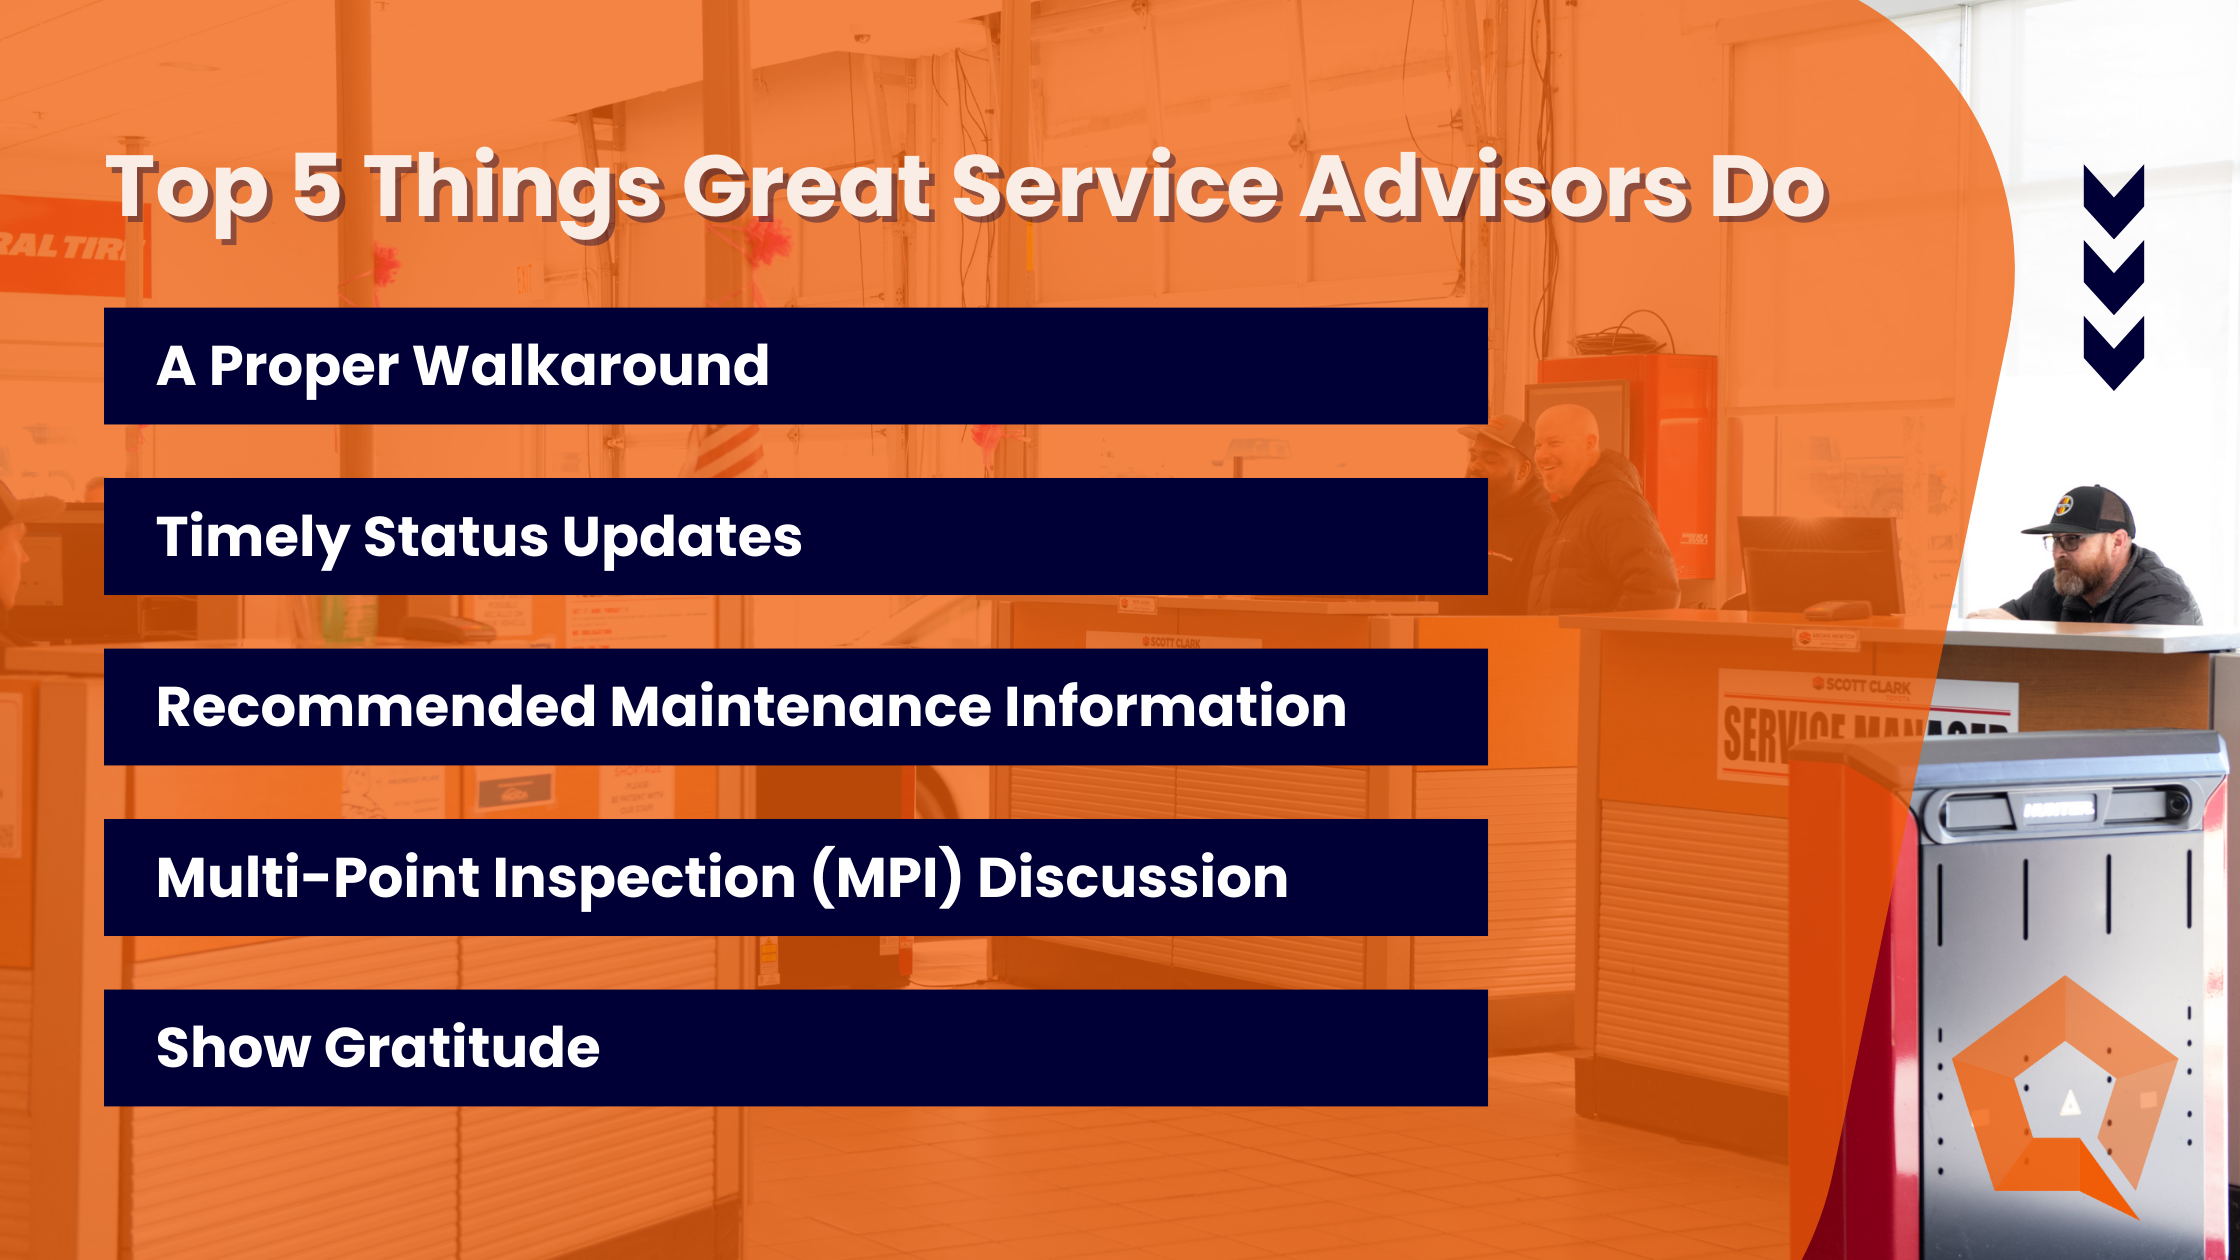 Top-5-Things-That-Great-Service-Advisors Do-Social-Image